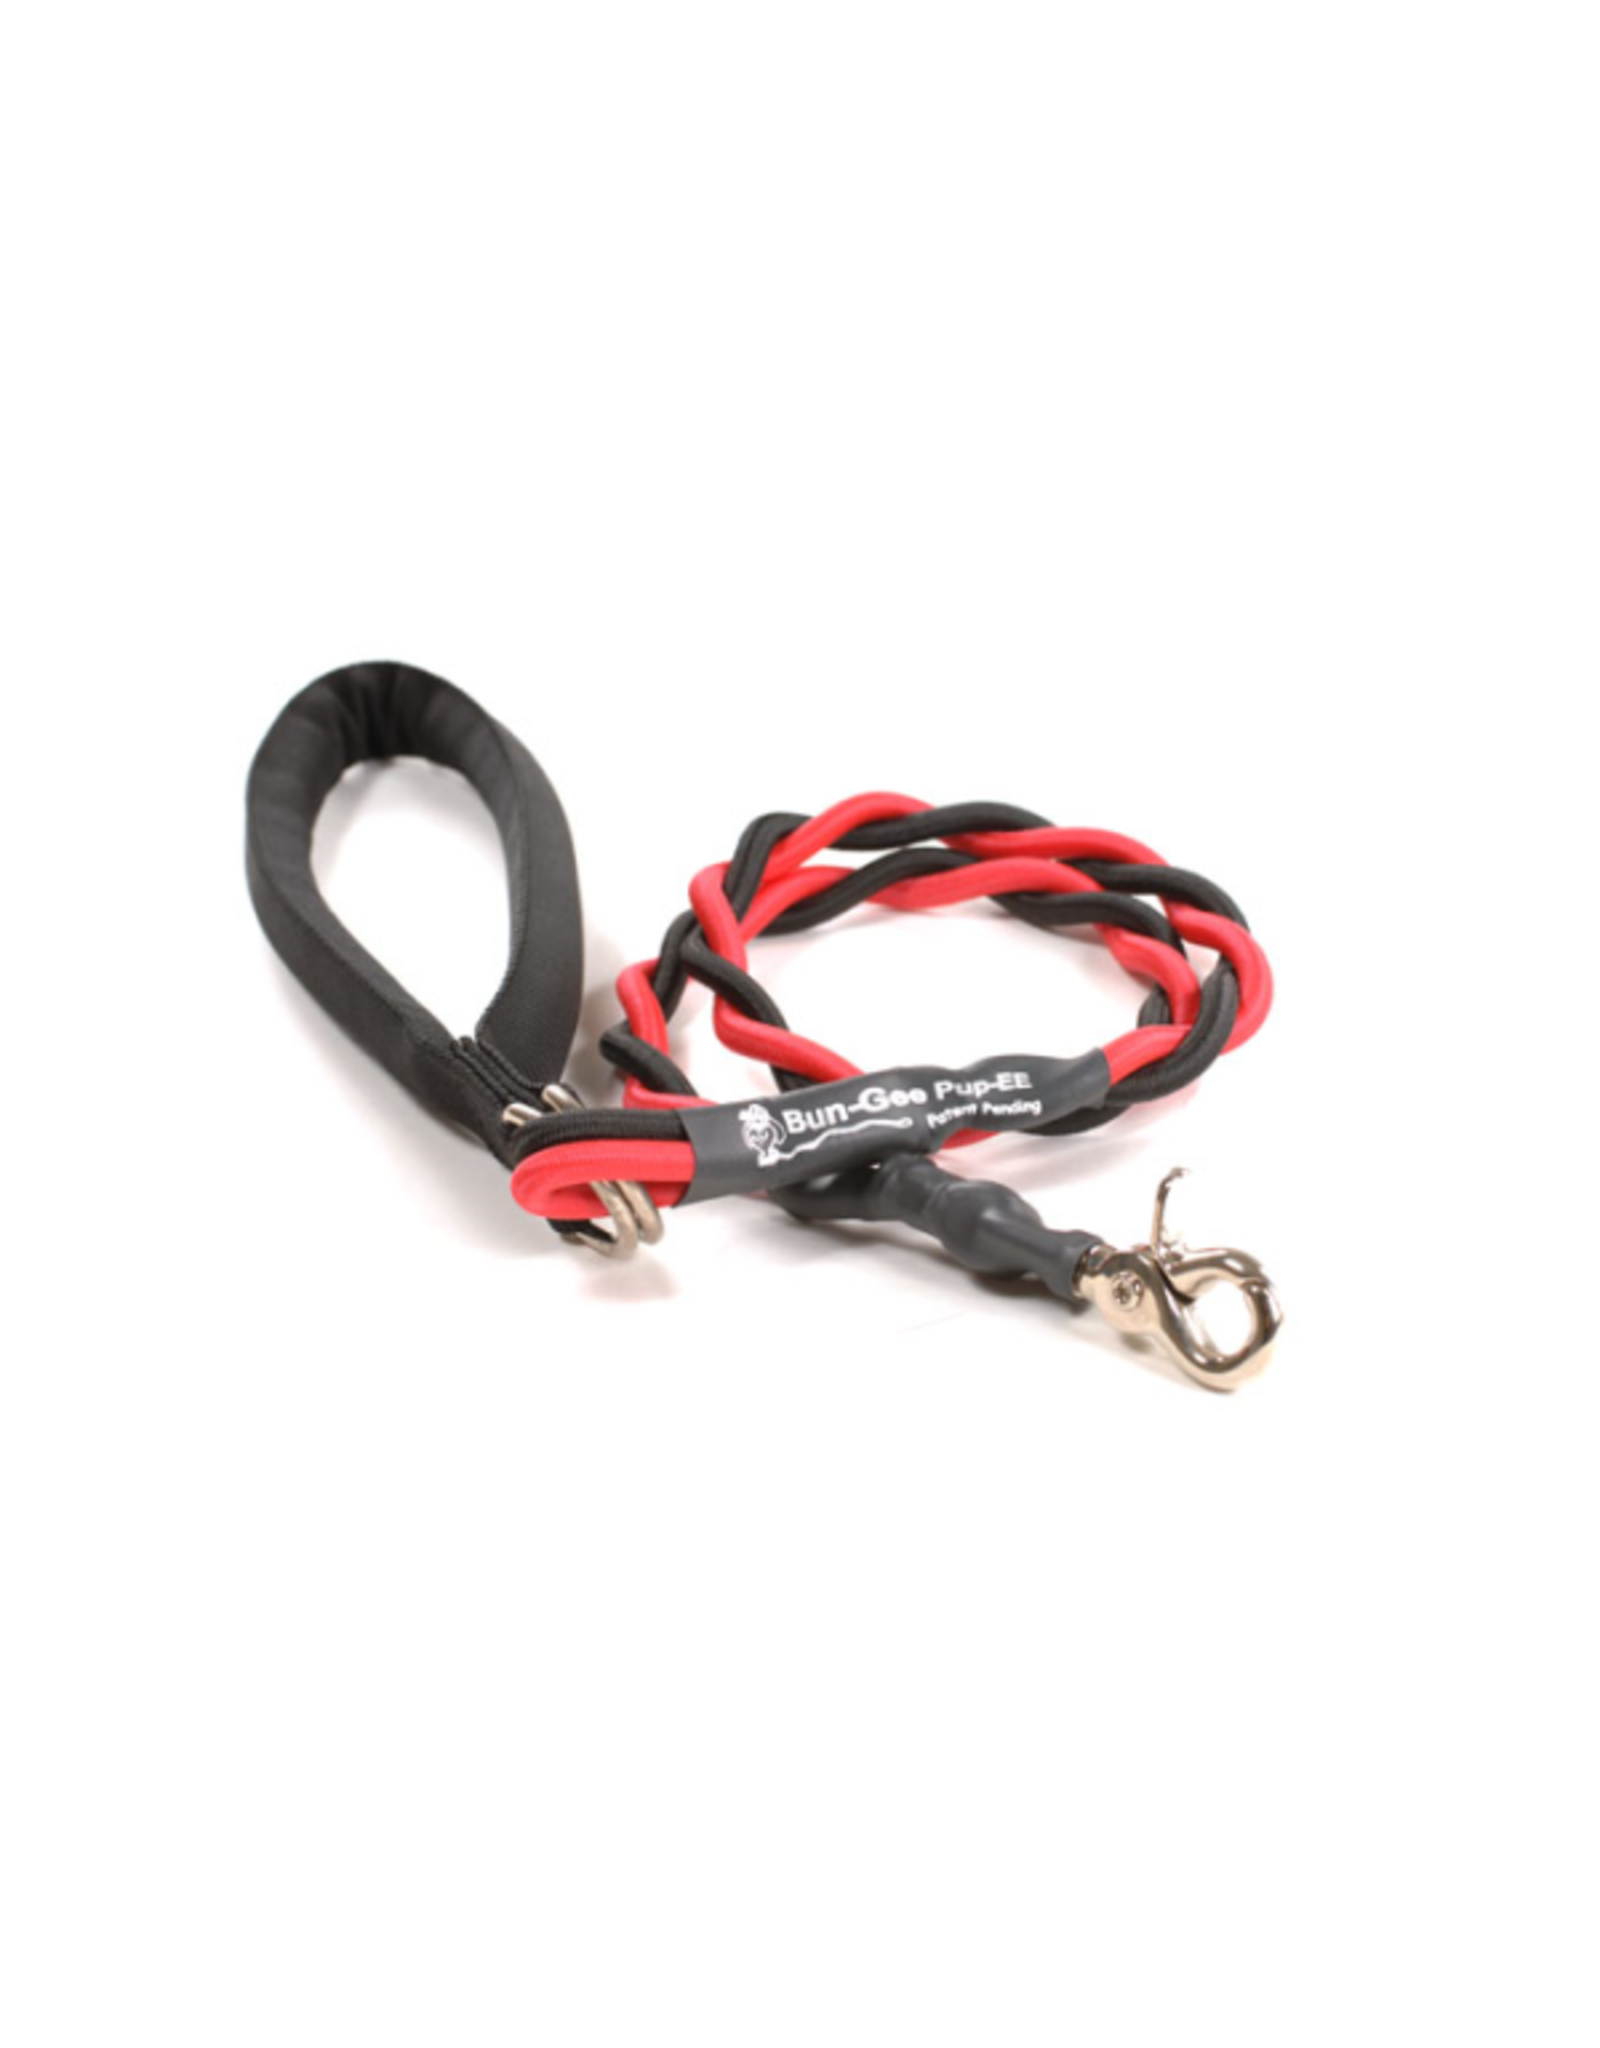 Bungee PupEE Leash 3' Red/Blk MED Up to 45 lb